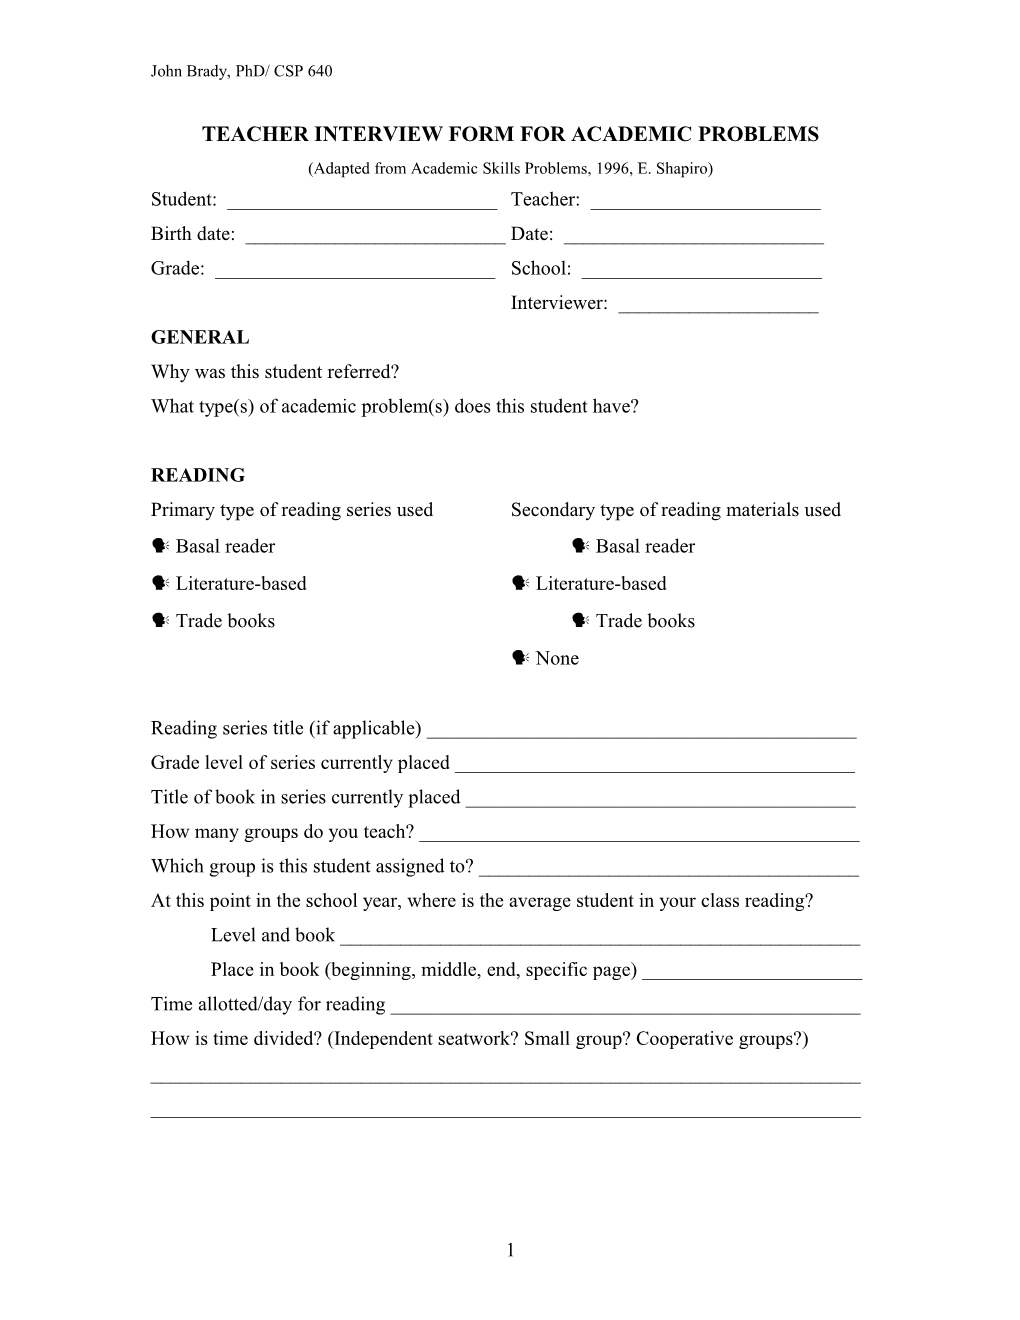 Teacher Interview Form for Academic Problems